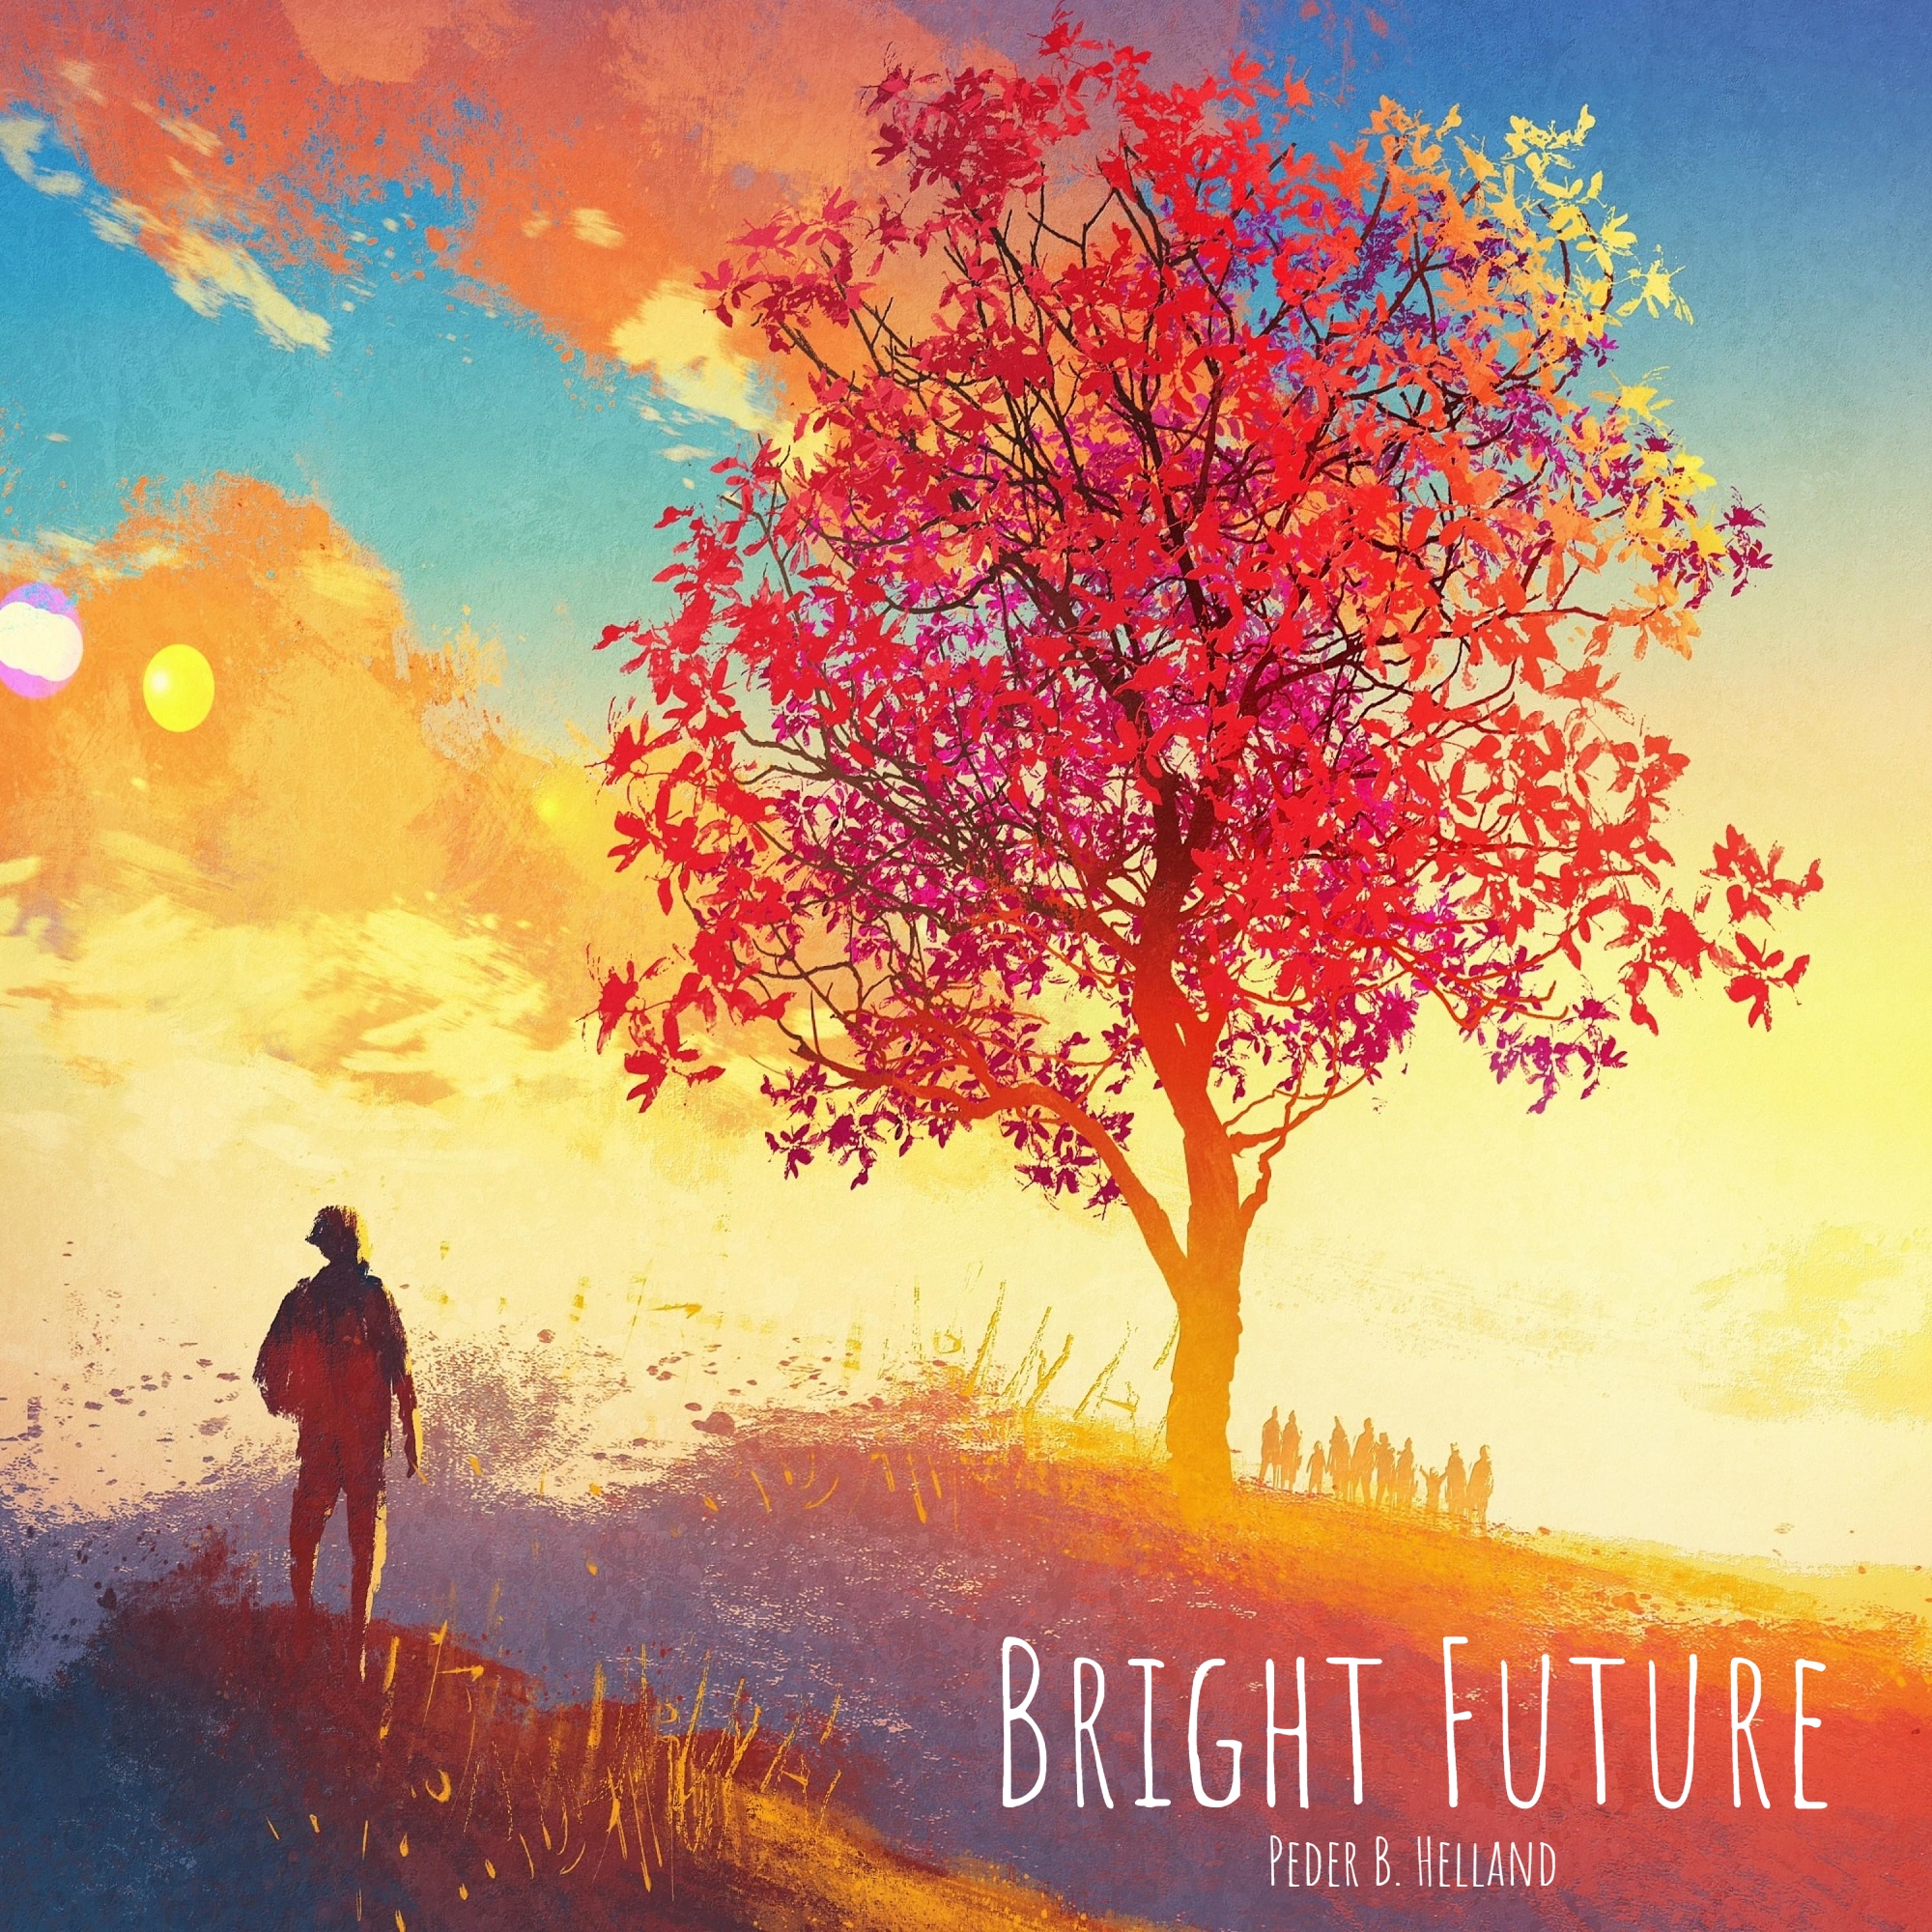 Cover art for the single Bright Future by Peder B. Helland